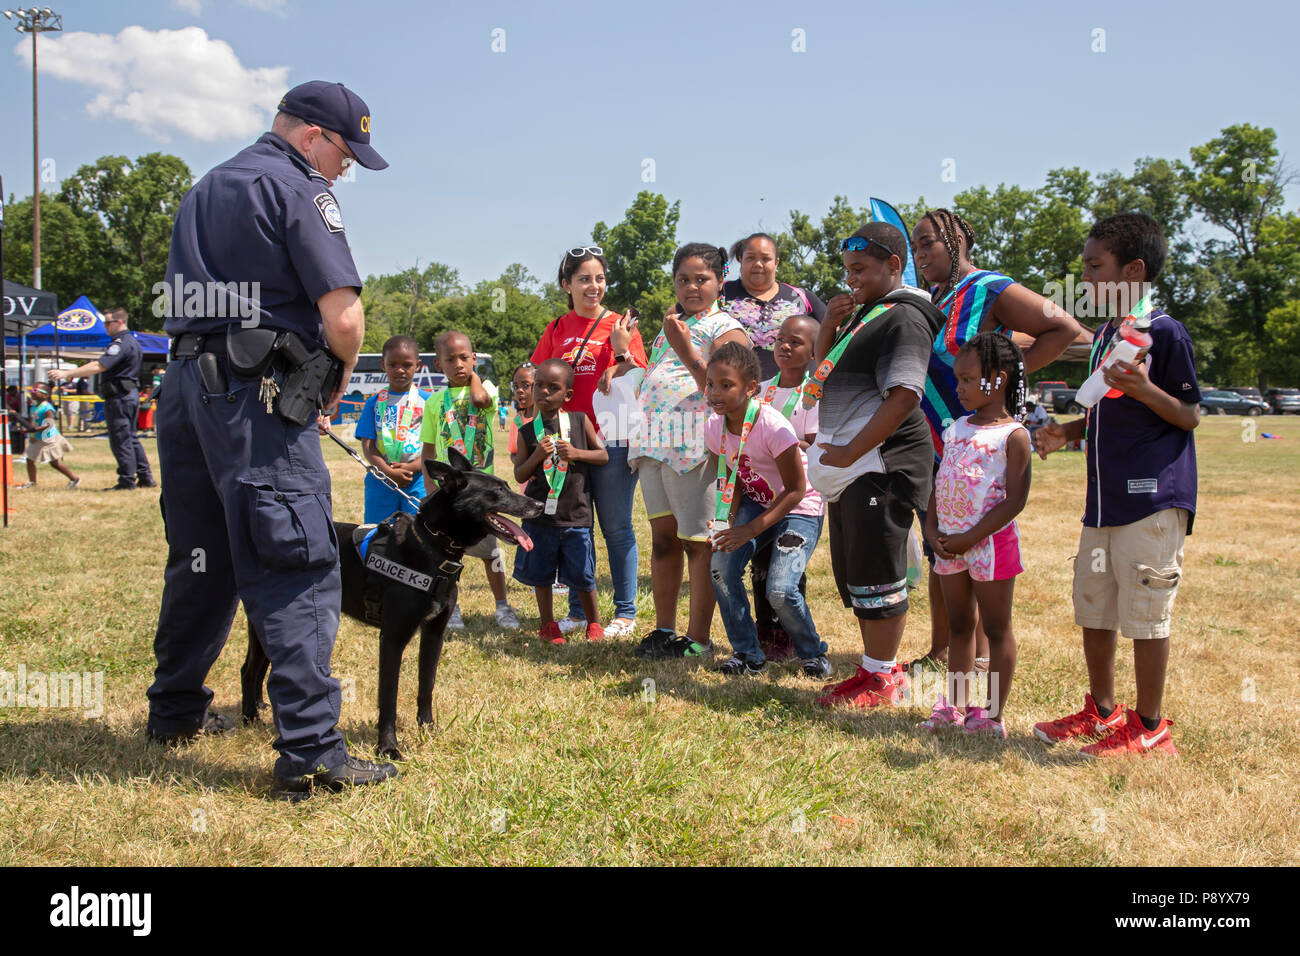 Detroit, Michigan - A U.S. Customs and Border Protection officer shows his dog, Buddy, to children at Metro Detroit Youth Day. Buddy is trained to det Stock Photo